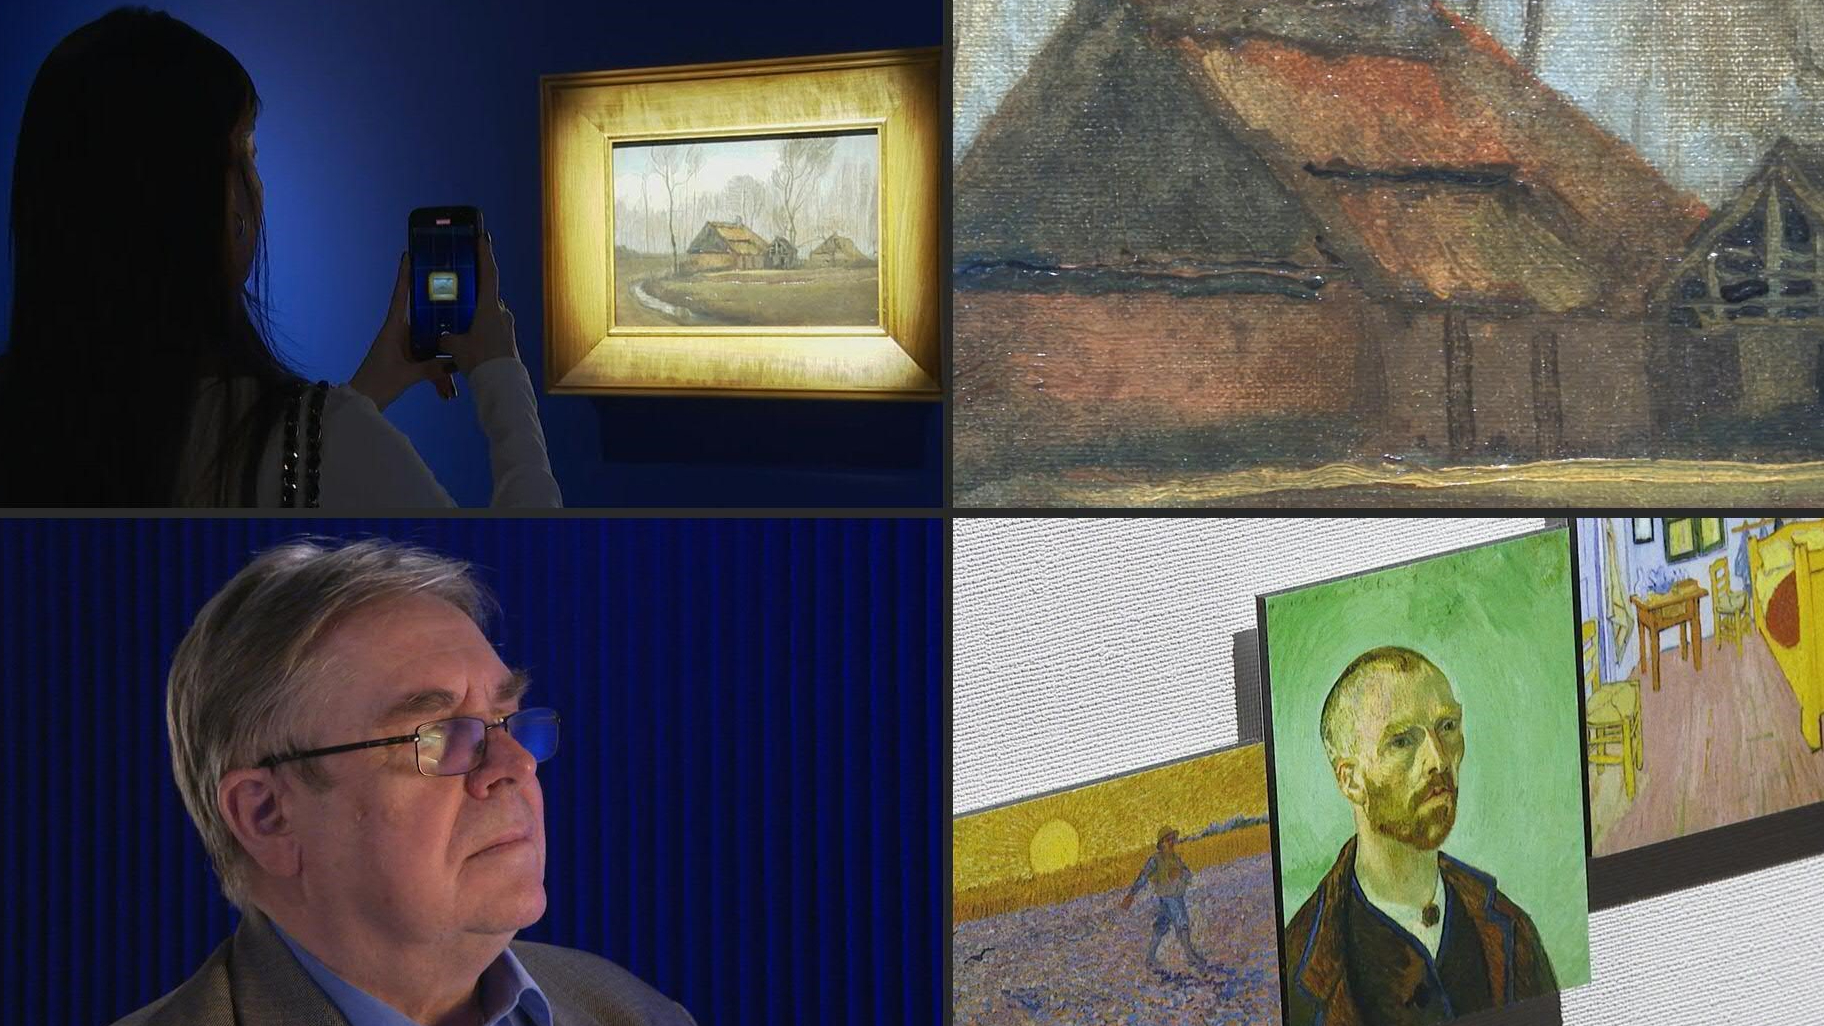 It's the only Van Gogh painting in Poland. /AFP